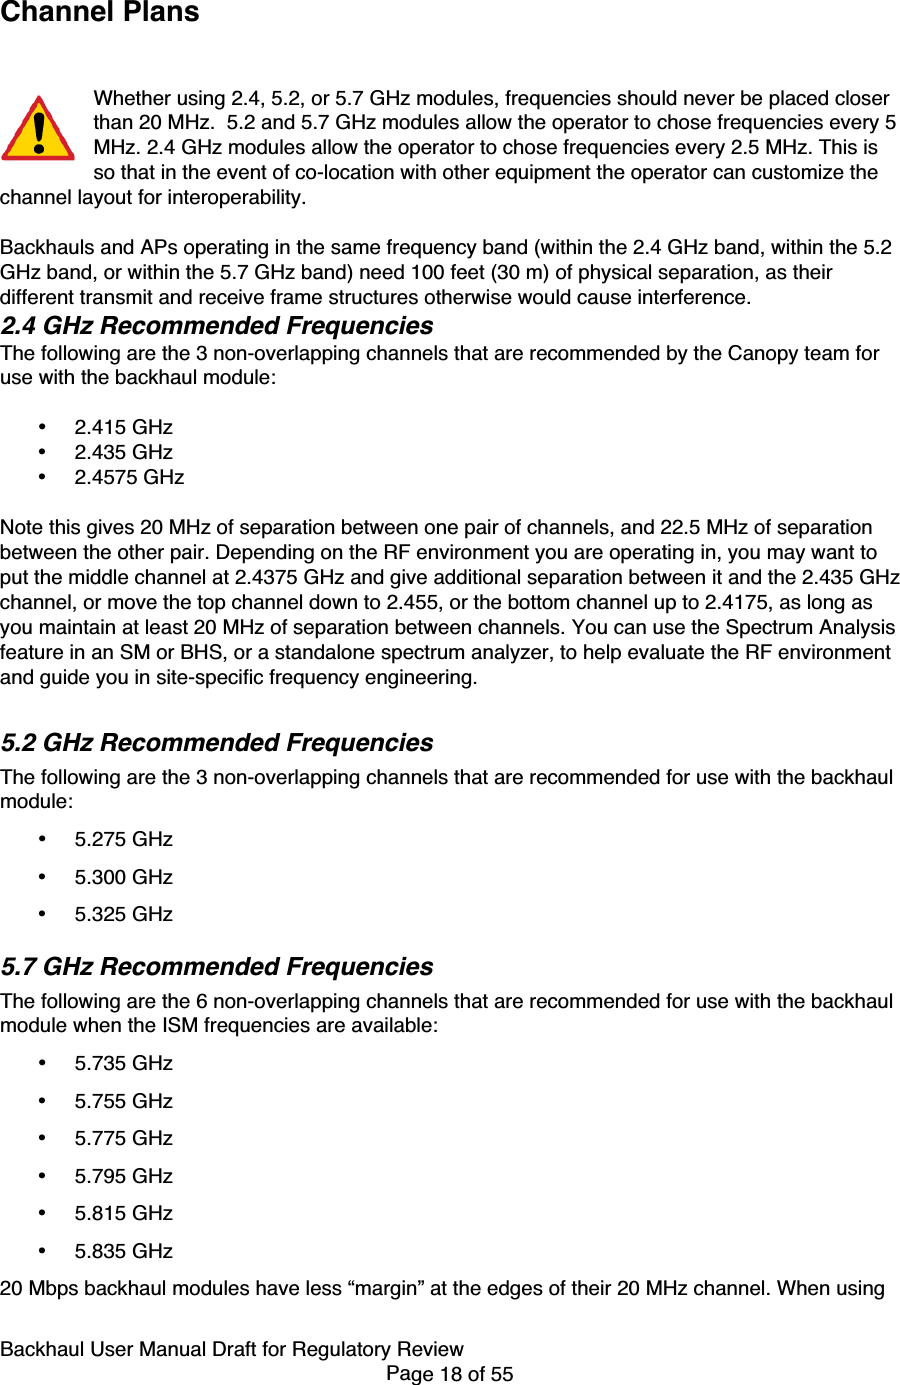 Backhaul User Manual Draft for Regulatory ReviewPage 18 of 55Channel PlansWhether using 2.4, 5.2, or 5.7 GHz modules, frequencies should never be placed closerthan 20 MHz.  5.2 and 5.7 GHz modules allow the operator to chose frequencies every 5MHz. 2.4 GHz modules allow the operator to chose frequencies every 2.5 MHz. This isso that in the event of co-location with other equipment the operator can customize thechannel layout for interoperability.Backhauls and APs operating in the same frequency band (within the 2.4 GHz band, within the 5.2GHz band, or within the 5.7 GHz band) need 100 feet (30 m) of physical separation, as theirdifferent transmit and receive frame structures otherwise would cause interference.2.4 GHz Recommended FrequenciesThe following are the 3 non-overlapping channels that are recommended by the Canopy team foruse with the backhaul module:• 2.415 GHz• 2.435 GHz• 2.4575 GHzNote this gives 20 MHz of separation between one pair of channels, and 22.5 MHz of separationbetween the other pair. Depending on the RF environment you are operating in, you may want toput the middle channel at 2.4375 GHz and give additional separation between it and the 2.435 GHzchannel, or move the top channel down to 2.455, or the bottom channel up to 2.4175, as long asyou maintain at least 20 MHz of separation between channels. You can use the Spectrum Analysisfeature in an SM or BHS, or a standalone spectrum analyzer, to help evaluate the RF environmentand guide you in site-specific frequency engineering.5.2 GHz Recommended FrequenciesThe following are the 3 non-overlapping channels that are recommended for use with the backhaulmodule:• 5.275 GHz• 5.300 GHz• 5.325 GHz5.7 GHz Recommended FrequenciesThe following are the 6 non-overlapping channels that are recommended for use with the backhaulmodule when the ISM frequencies are available:• 5.735 GHz• 5.755 GHz• 5.775 GHz• 5.795 GHz• 5.815 GHz• 5.835 GHz20 Mbps backhaul modules have less “margin” at the edges of their 20 MHz channel. When using